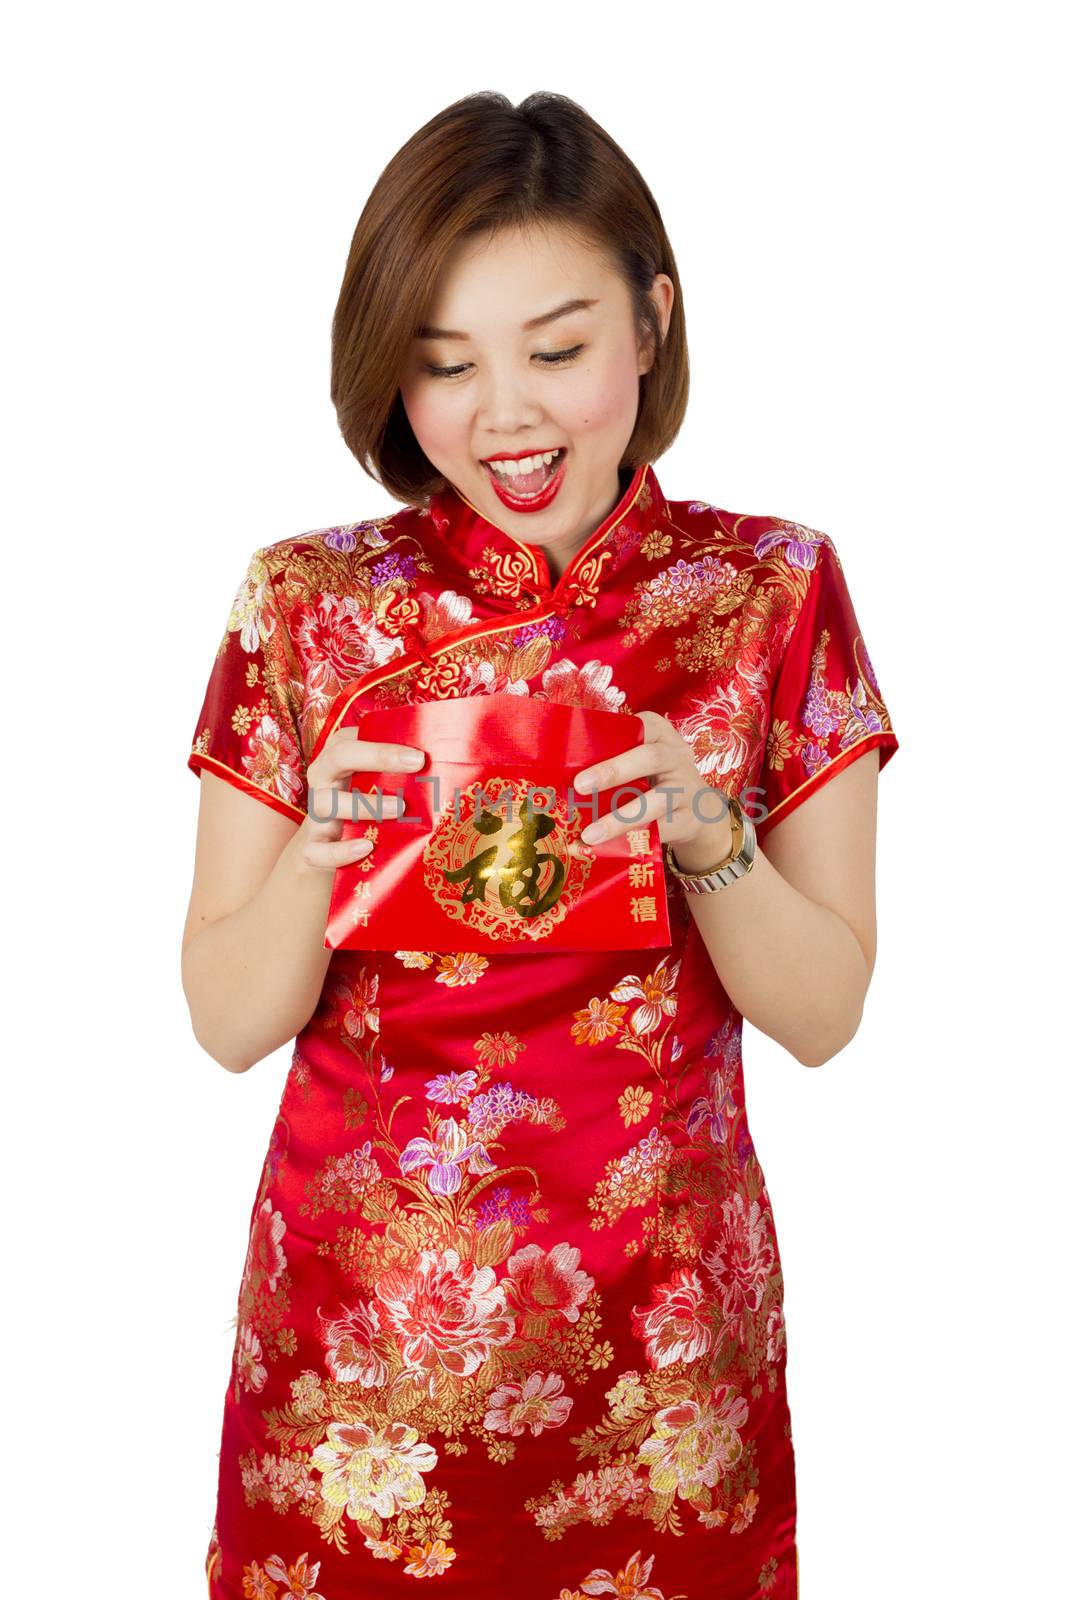 Asian girl got big surprise holding ung-pao or red porcket gift  by jayzynism